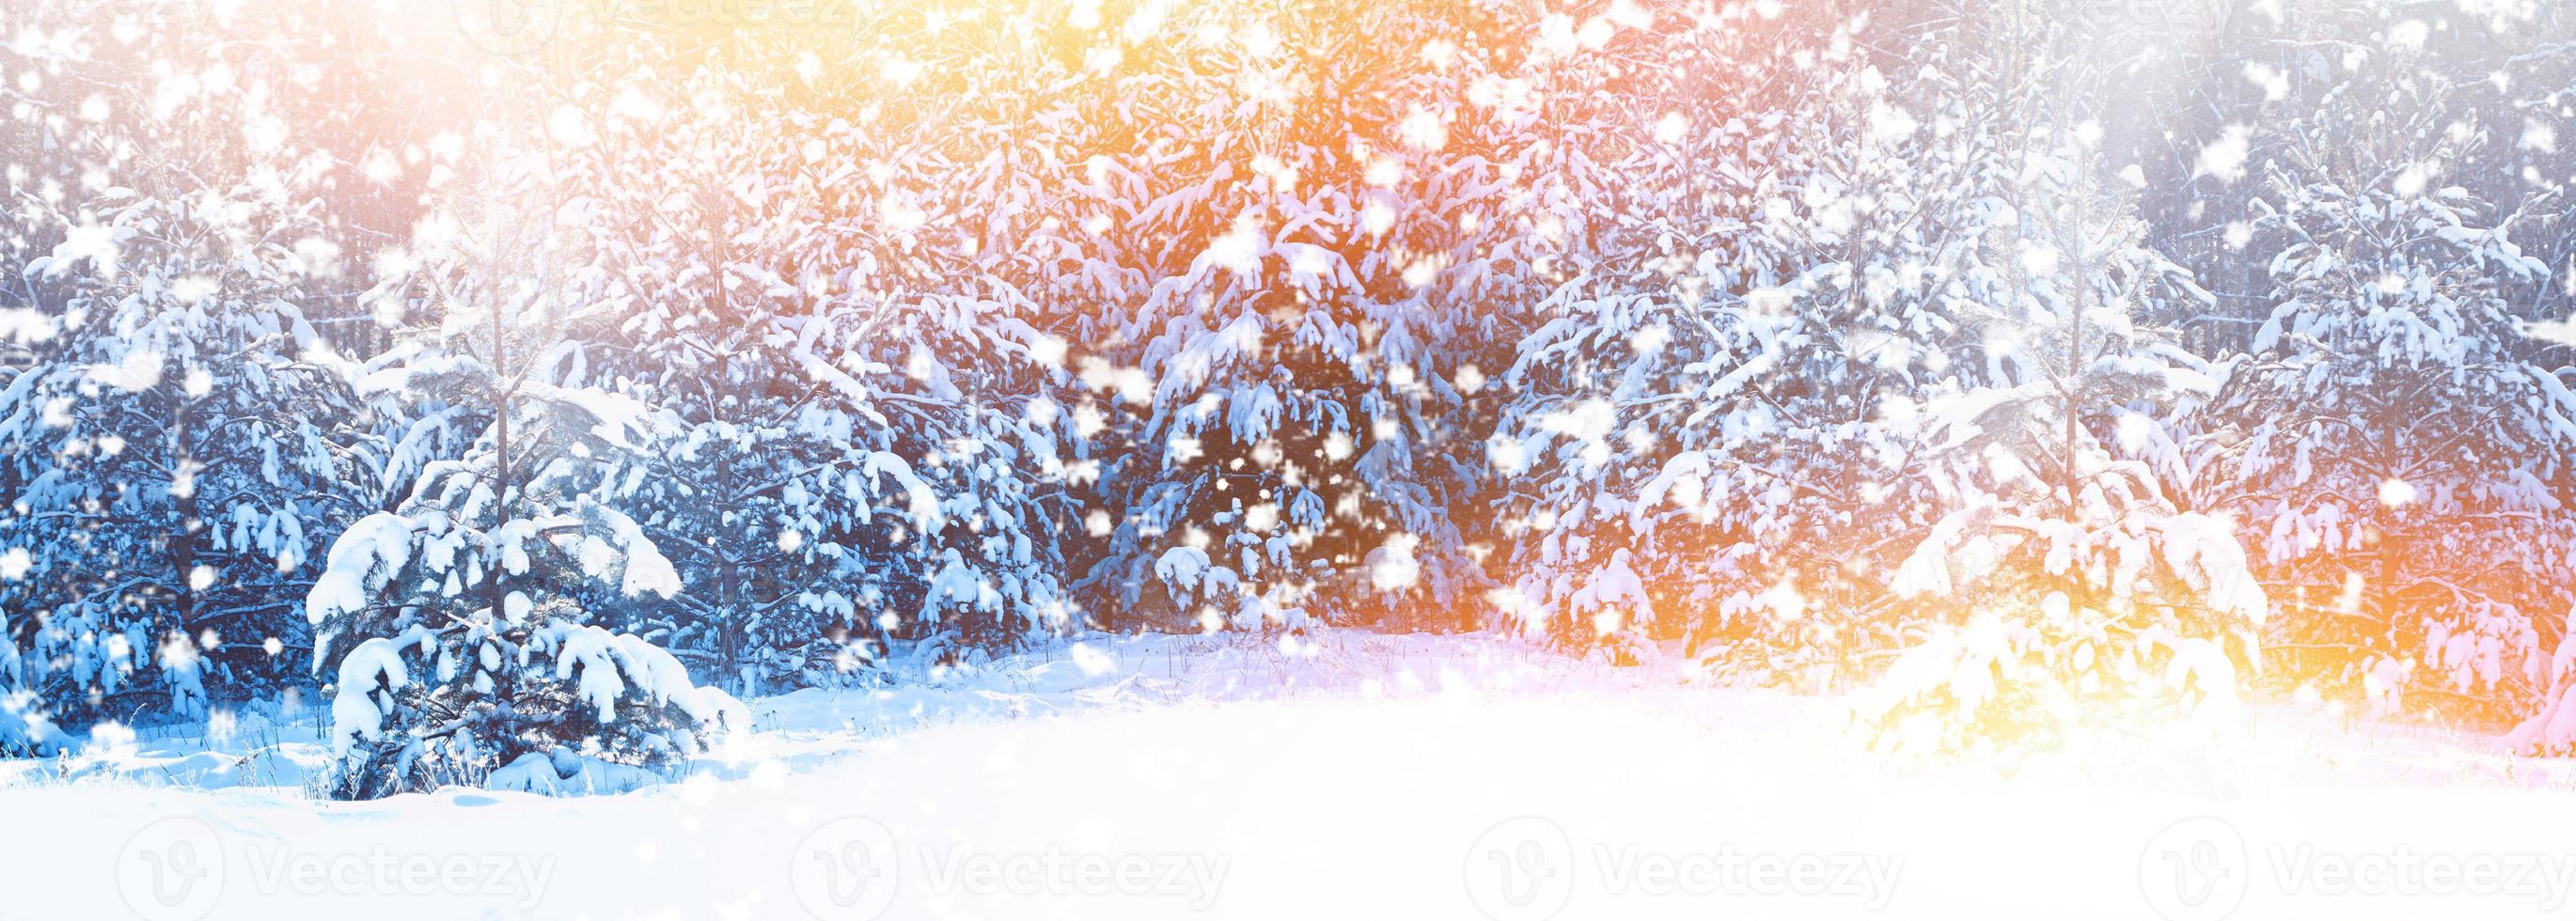 New Year card. Frozen winter forest with snow covered trees. photo